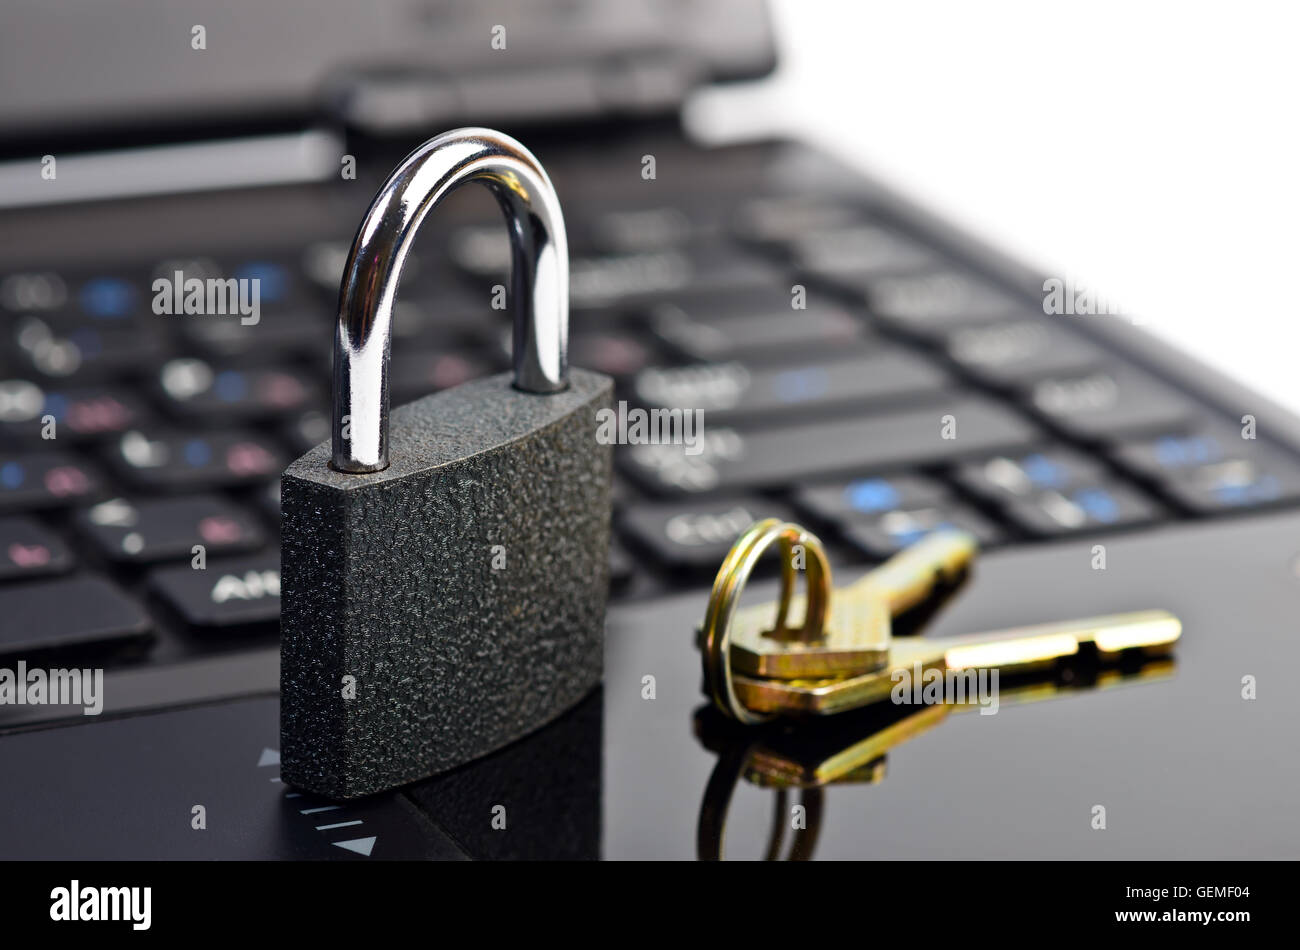 Data security concept with padlock on laptop computer keyboard Stock Photo